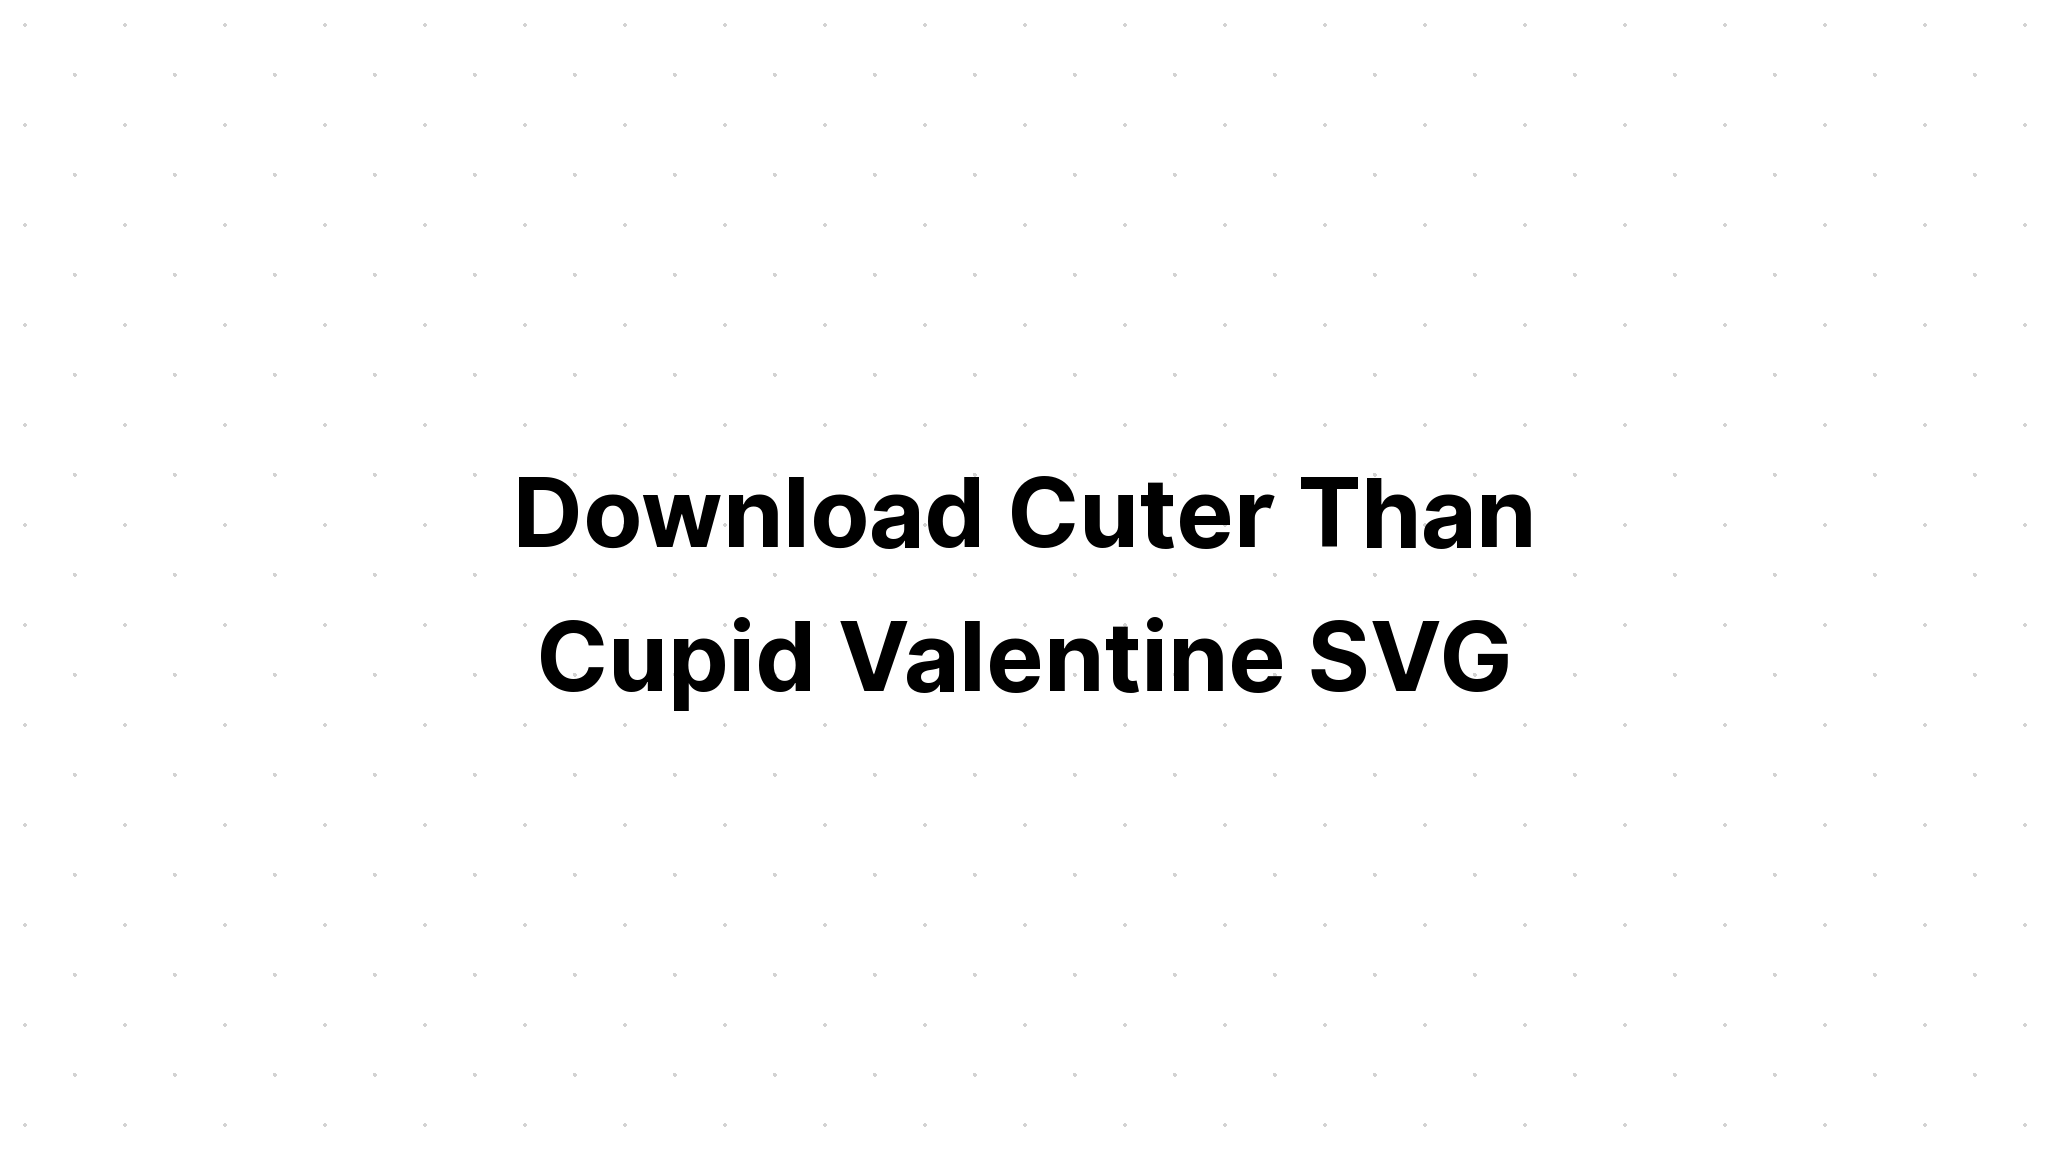 Download Cuter Than Cupid Free Svg - Layered SVG Cut File